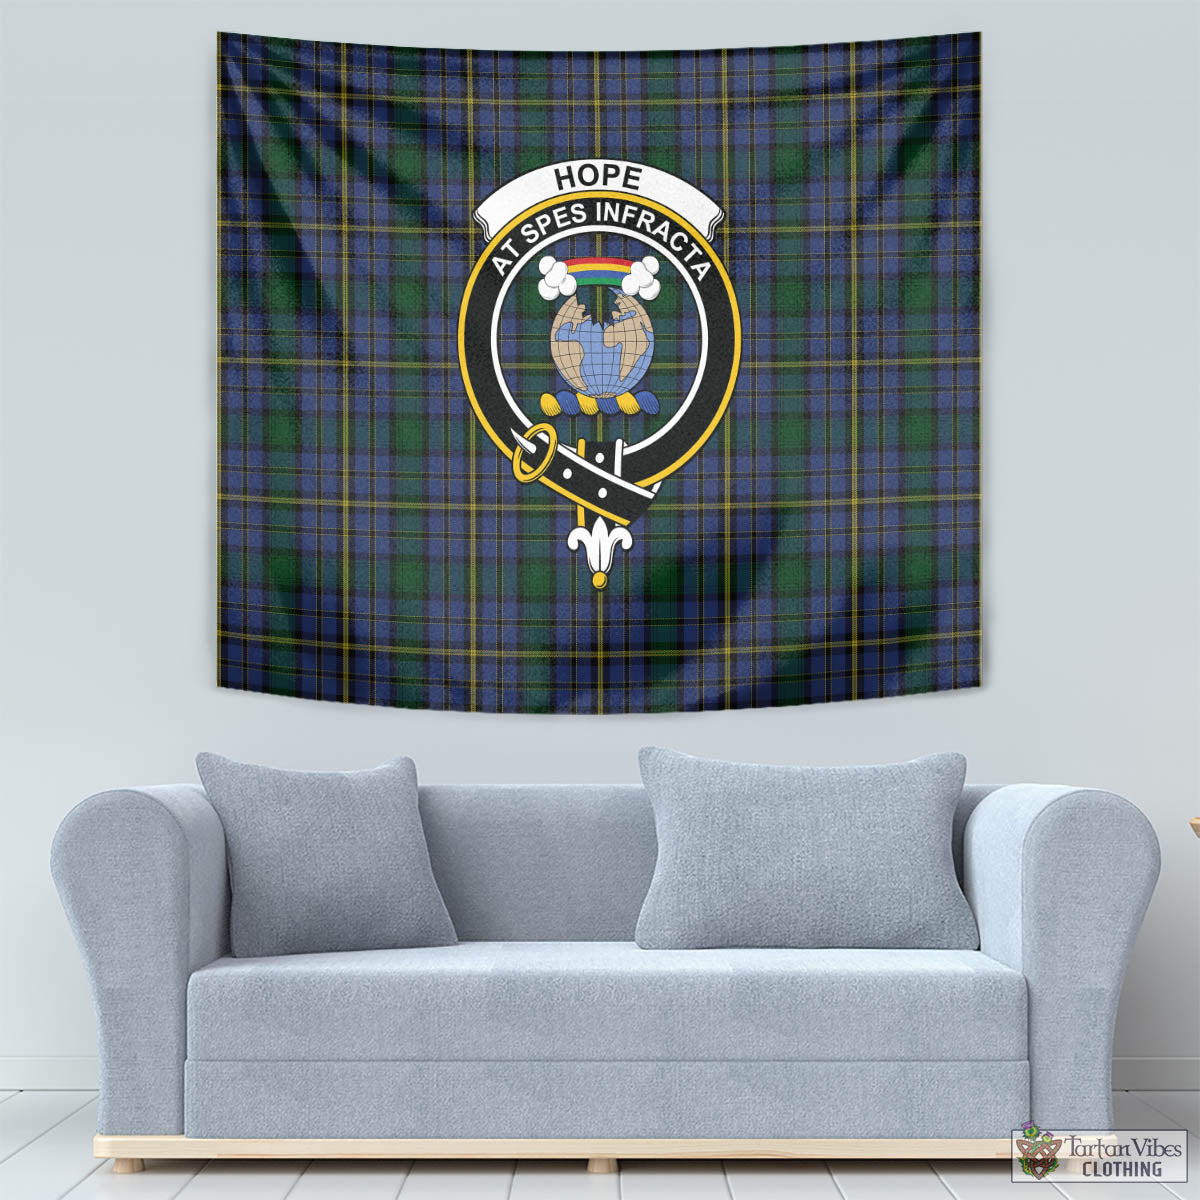 Tartan Vibes Clothing Hope Clan Originaux Tartan Tapestry Wall Hanging and Home Decor for Room with Family Crest